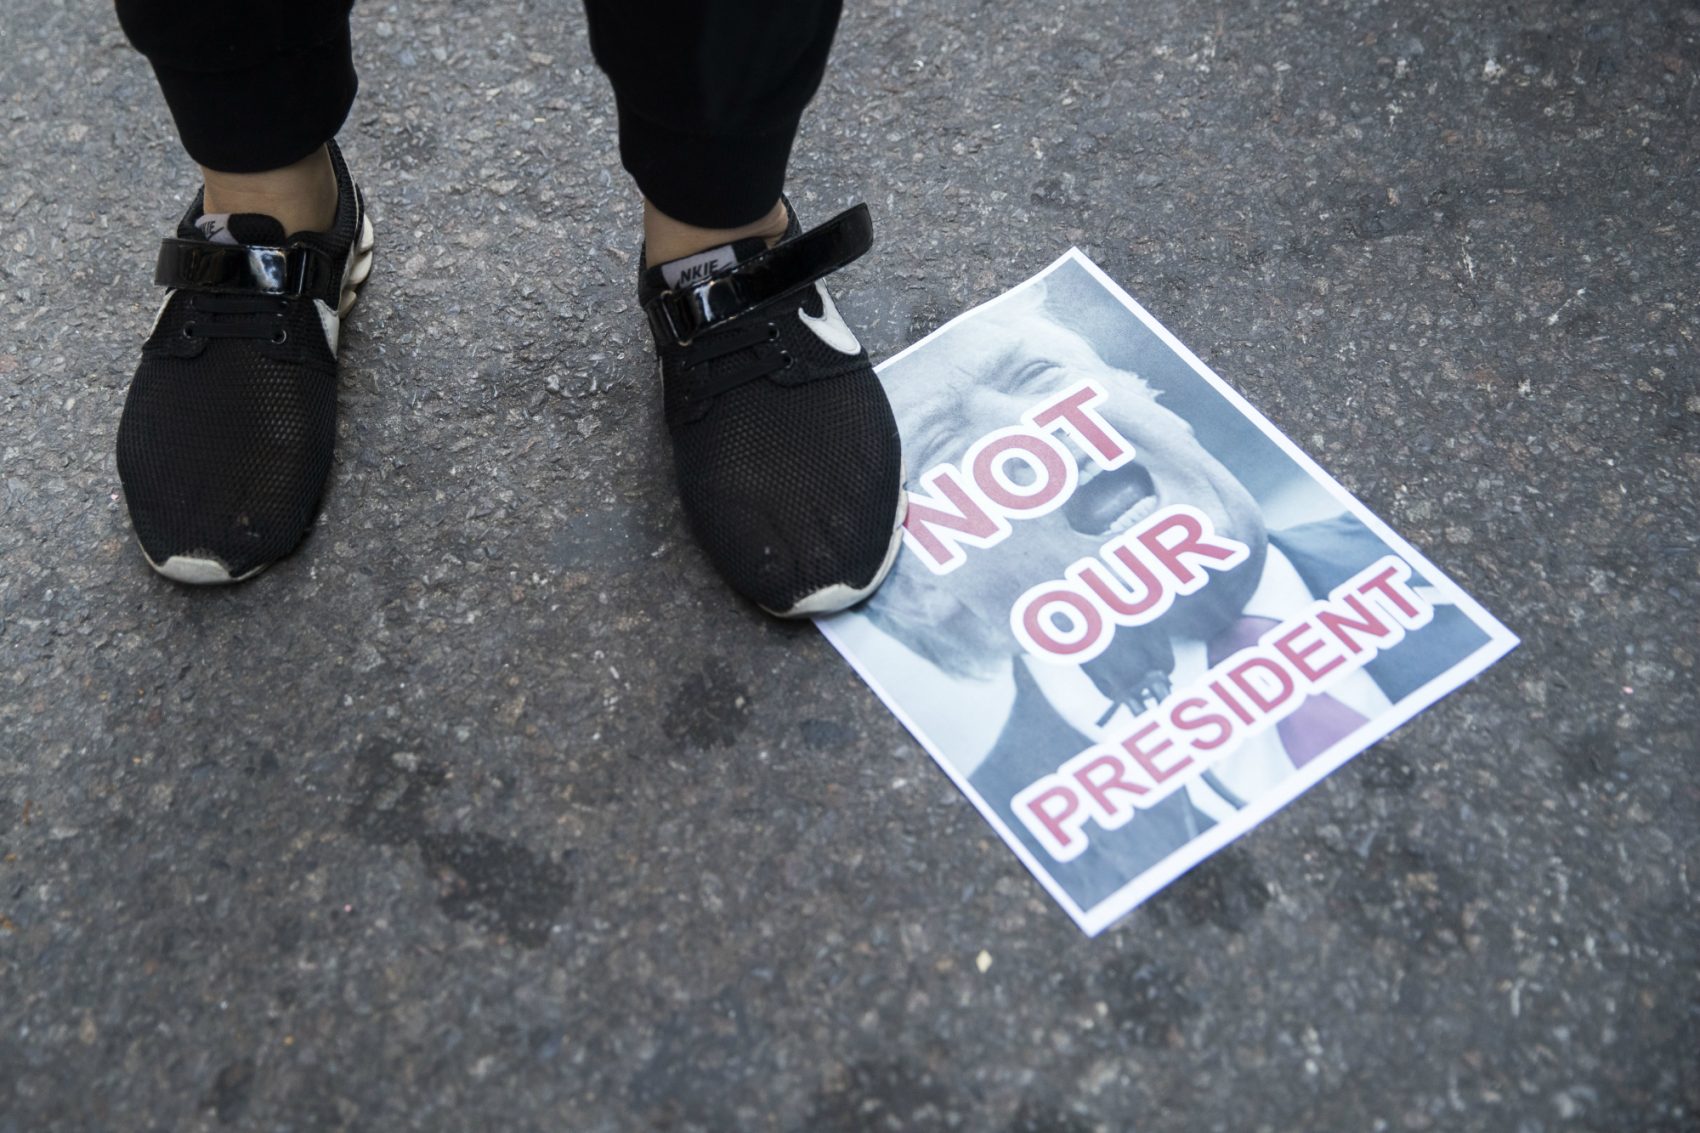 Do Americans of conscience have the energy and the will to shape themselves into a genuine and enduring protest movement?
Pictured: Protestors stands on a poster during a demonstration against the election of President-elect Donald Trump during a rally outside Trump Tower, Saturday, Nov. 12, 2016, in New York. (Mary Altaffer/AP)